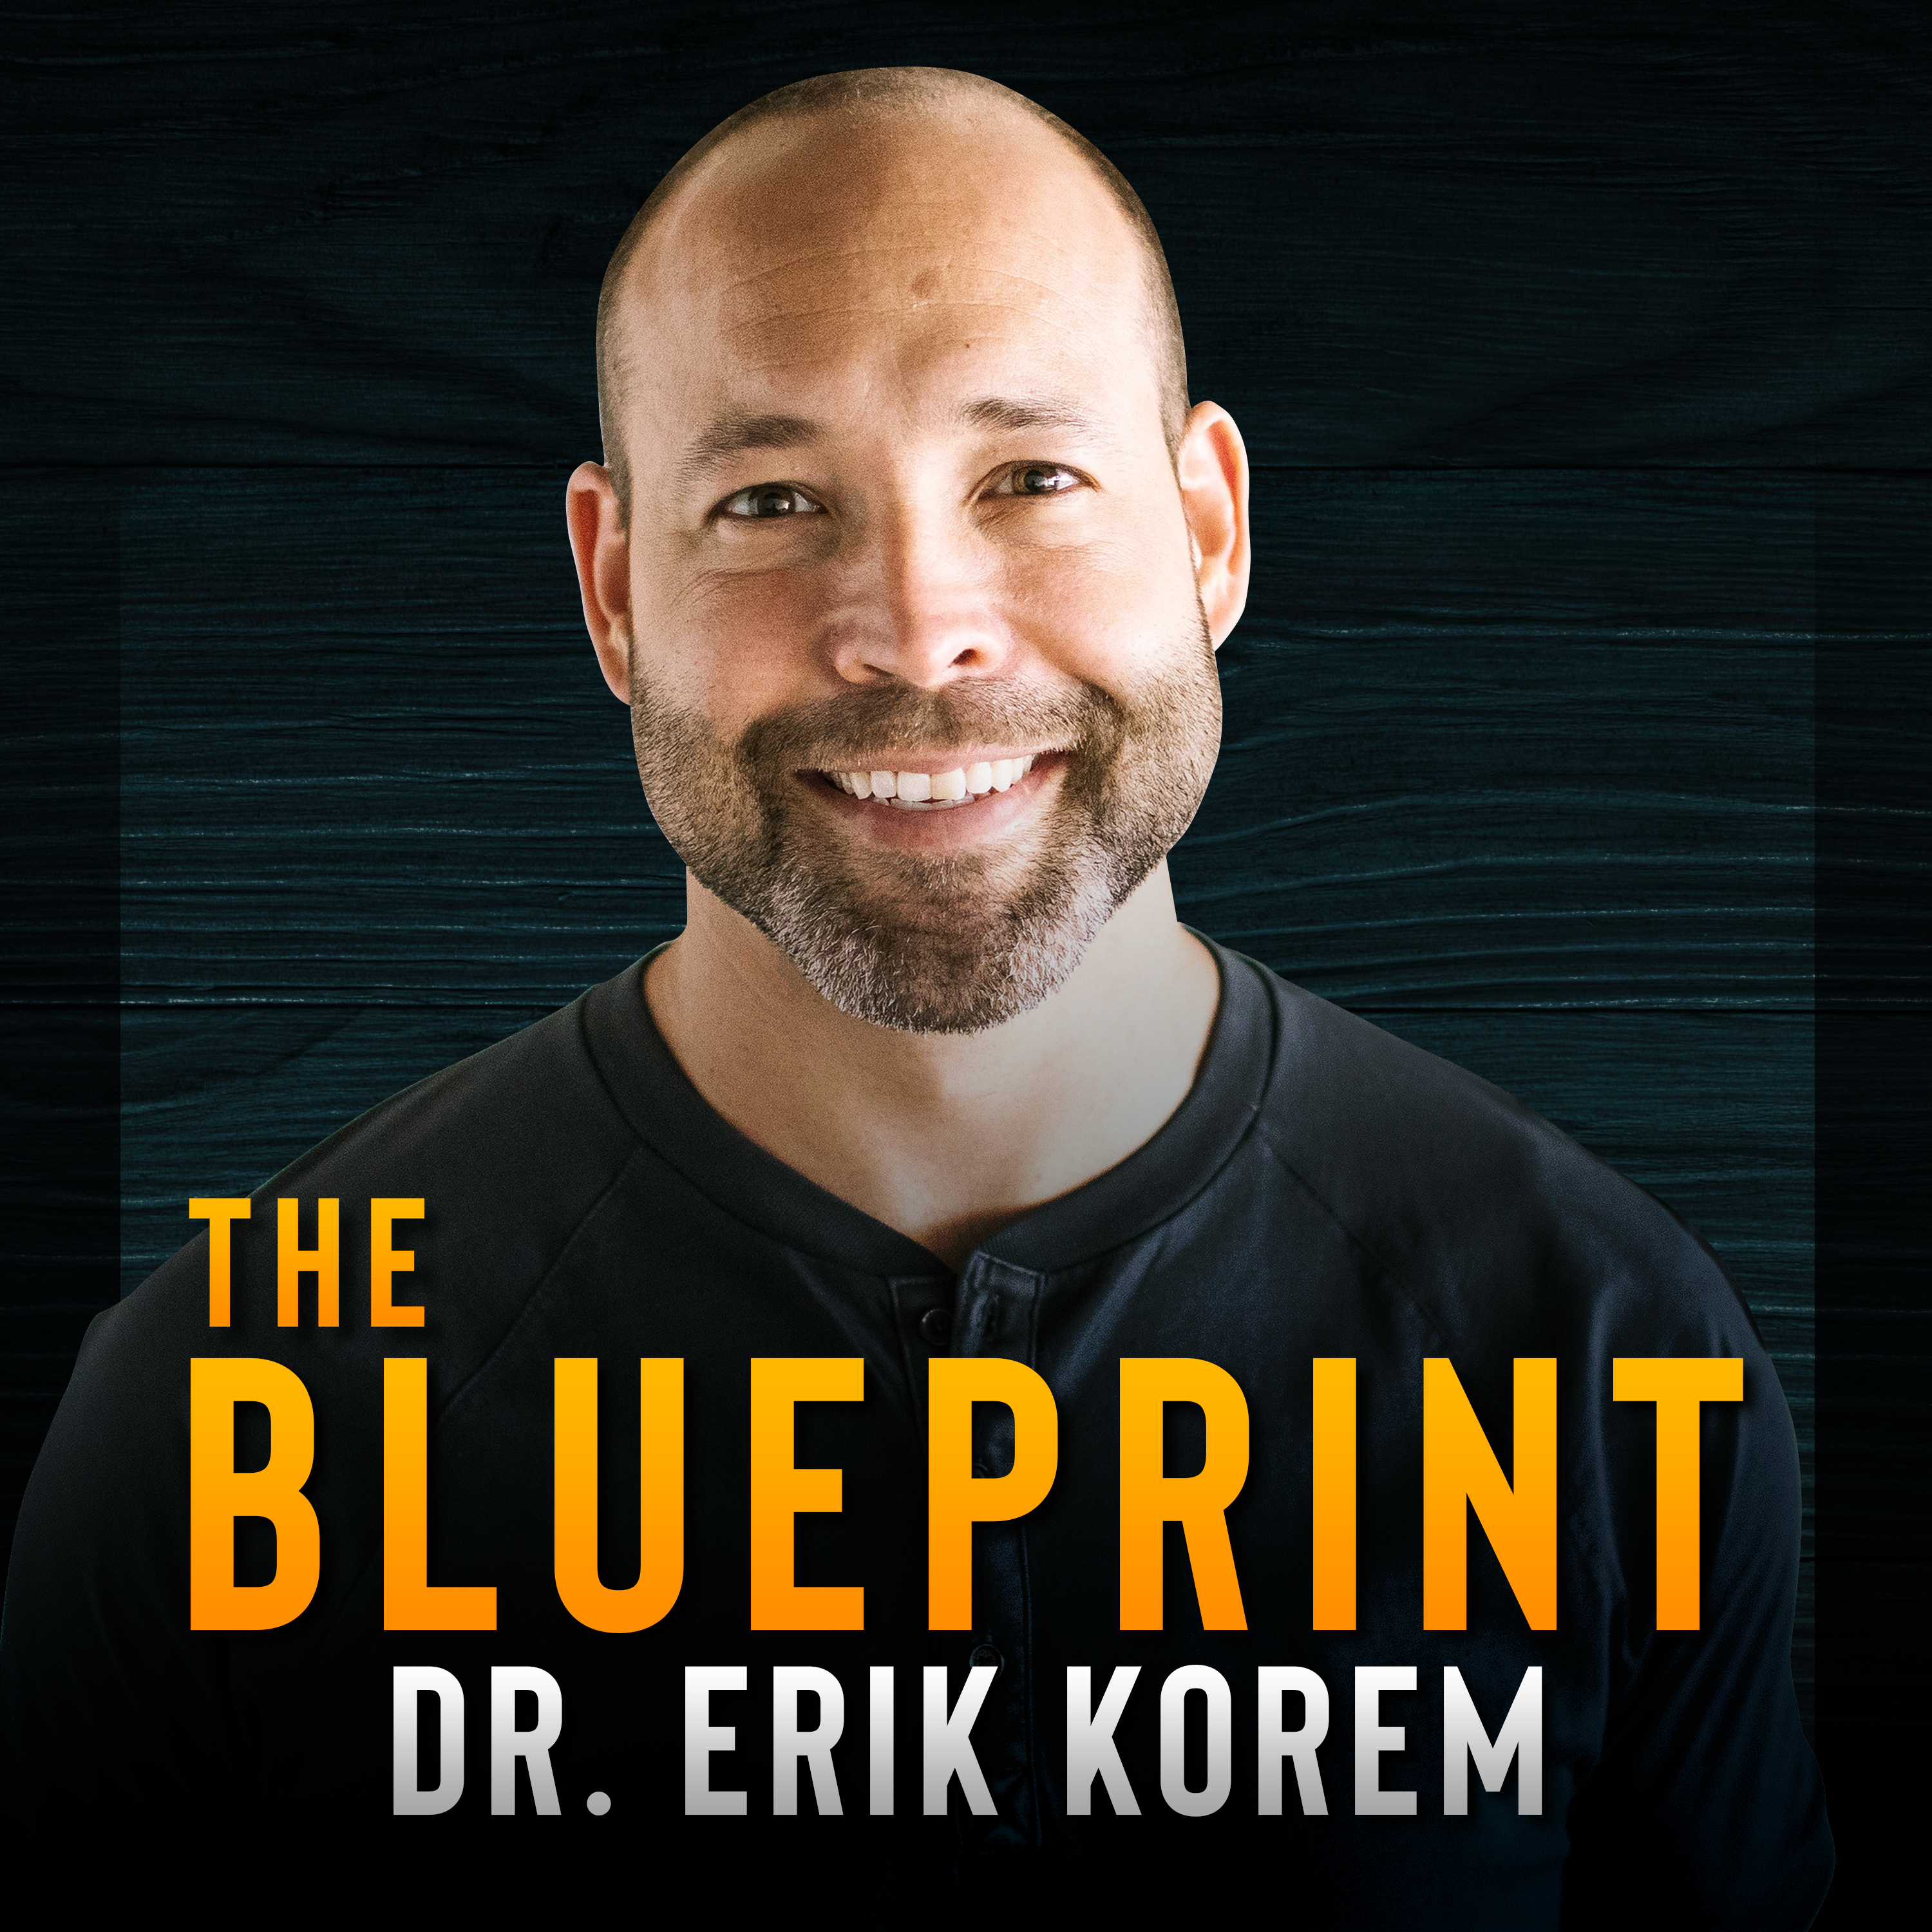 #421. Former Navy SEAL Commander on the Role of Vulnerability & Humor in Mental Resilience | Why Great Leaders Avoid Sarcasm & More with Mark Divine